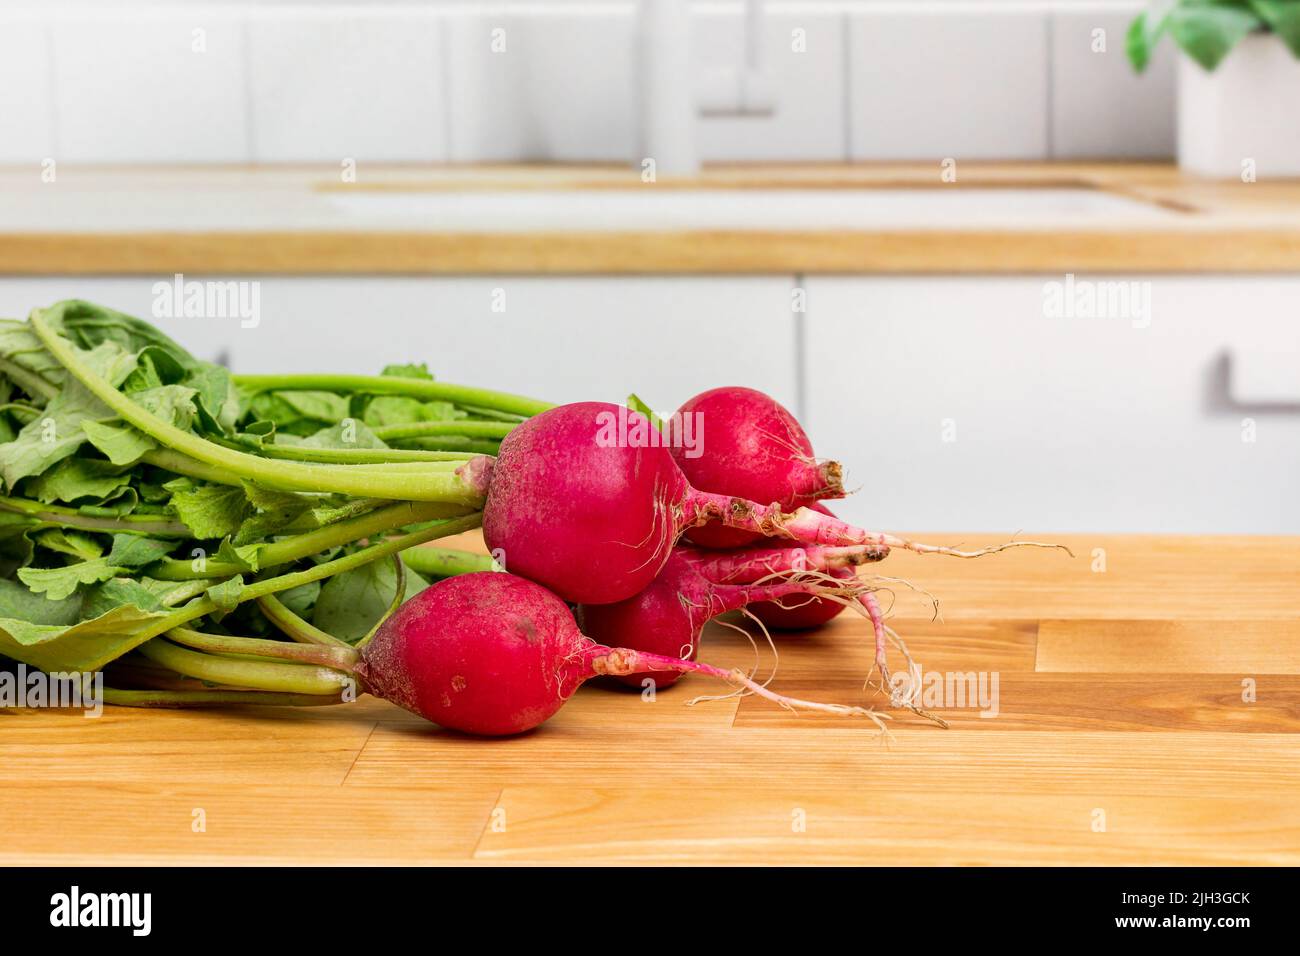 Fresh radishes from garden in kitchen. Organic produce, healthy diet and produce concept. Stock Photo